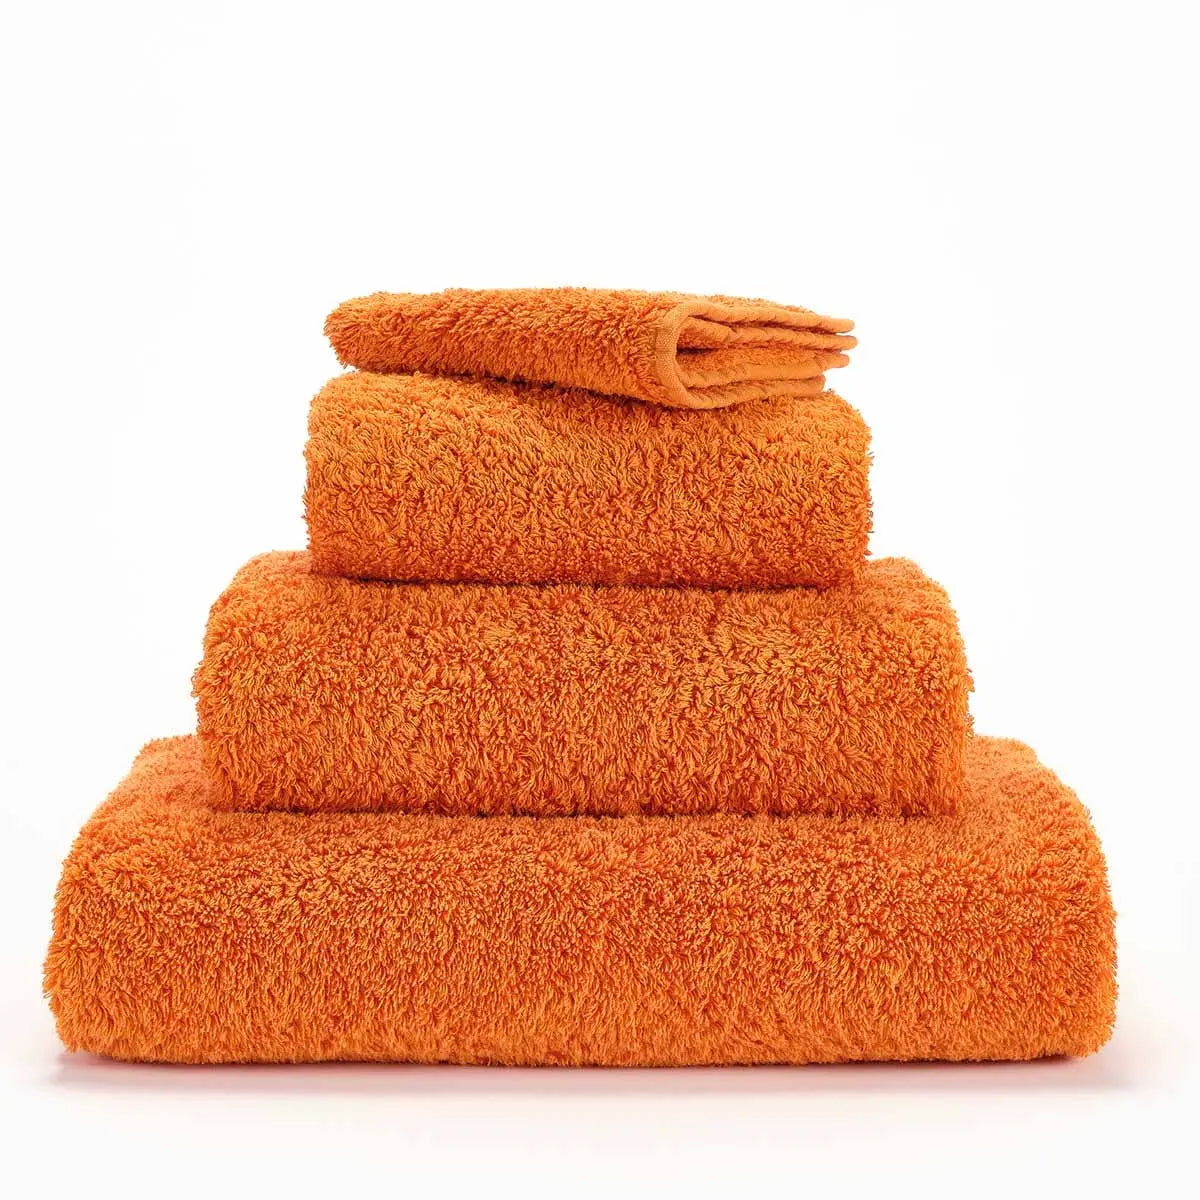 Abyss Super Pile Stack of Towels in Tangerine